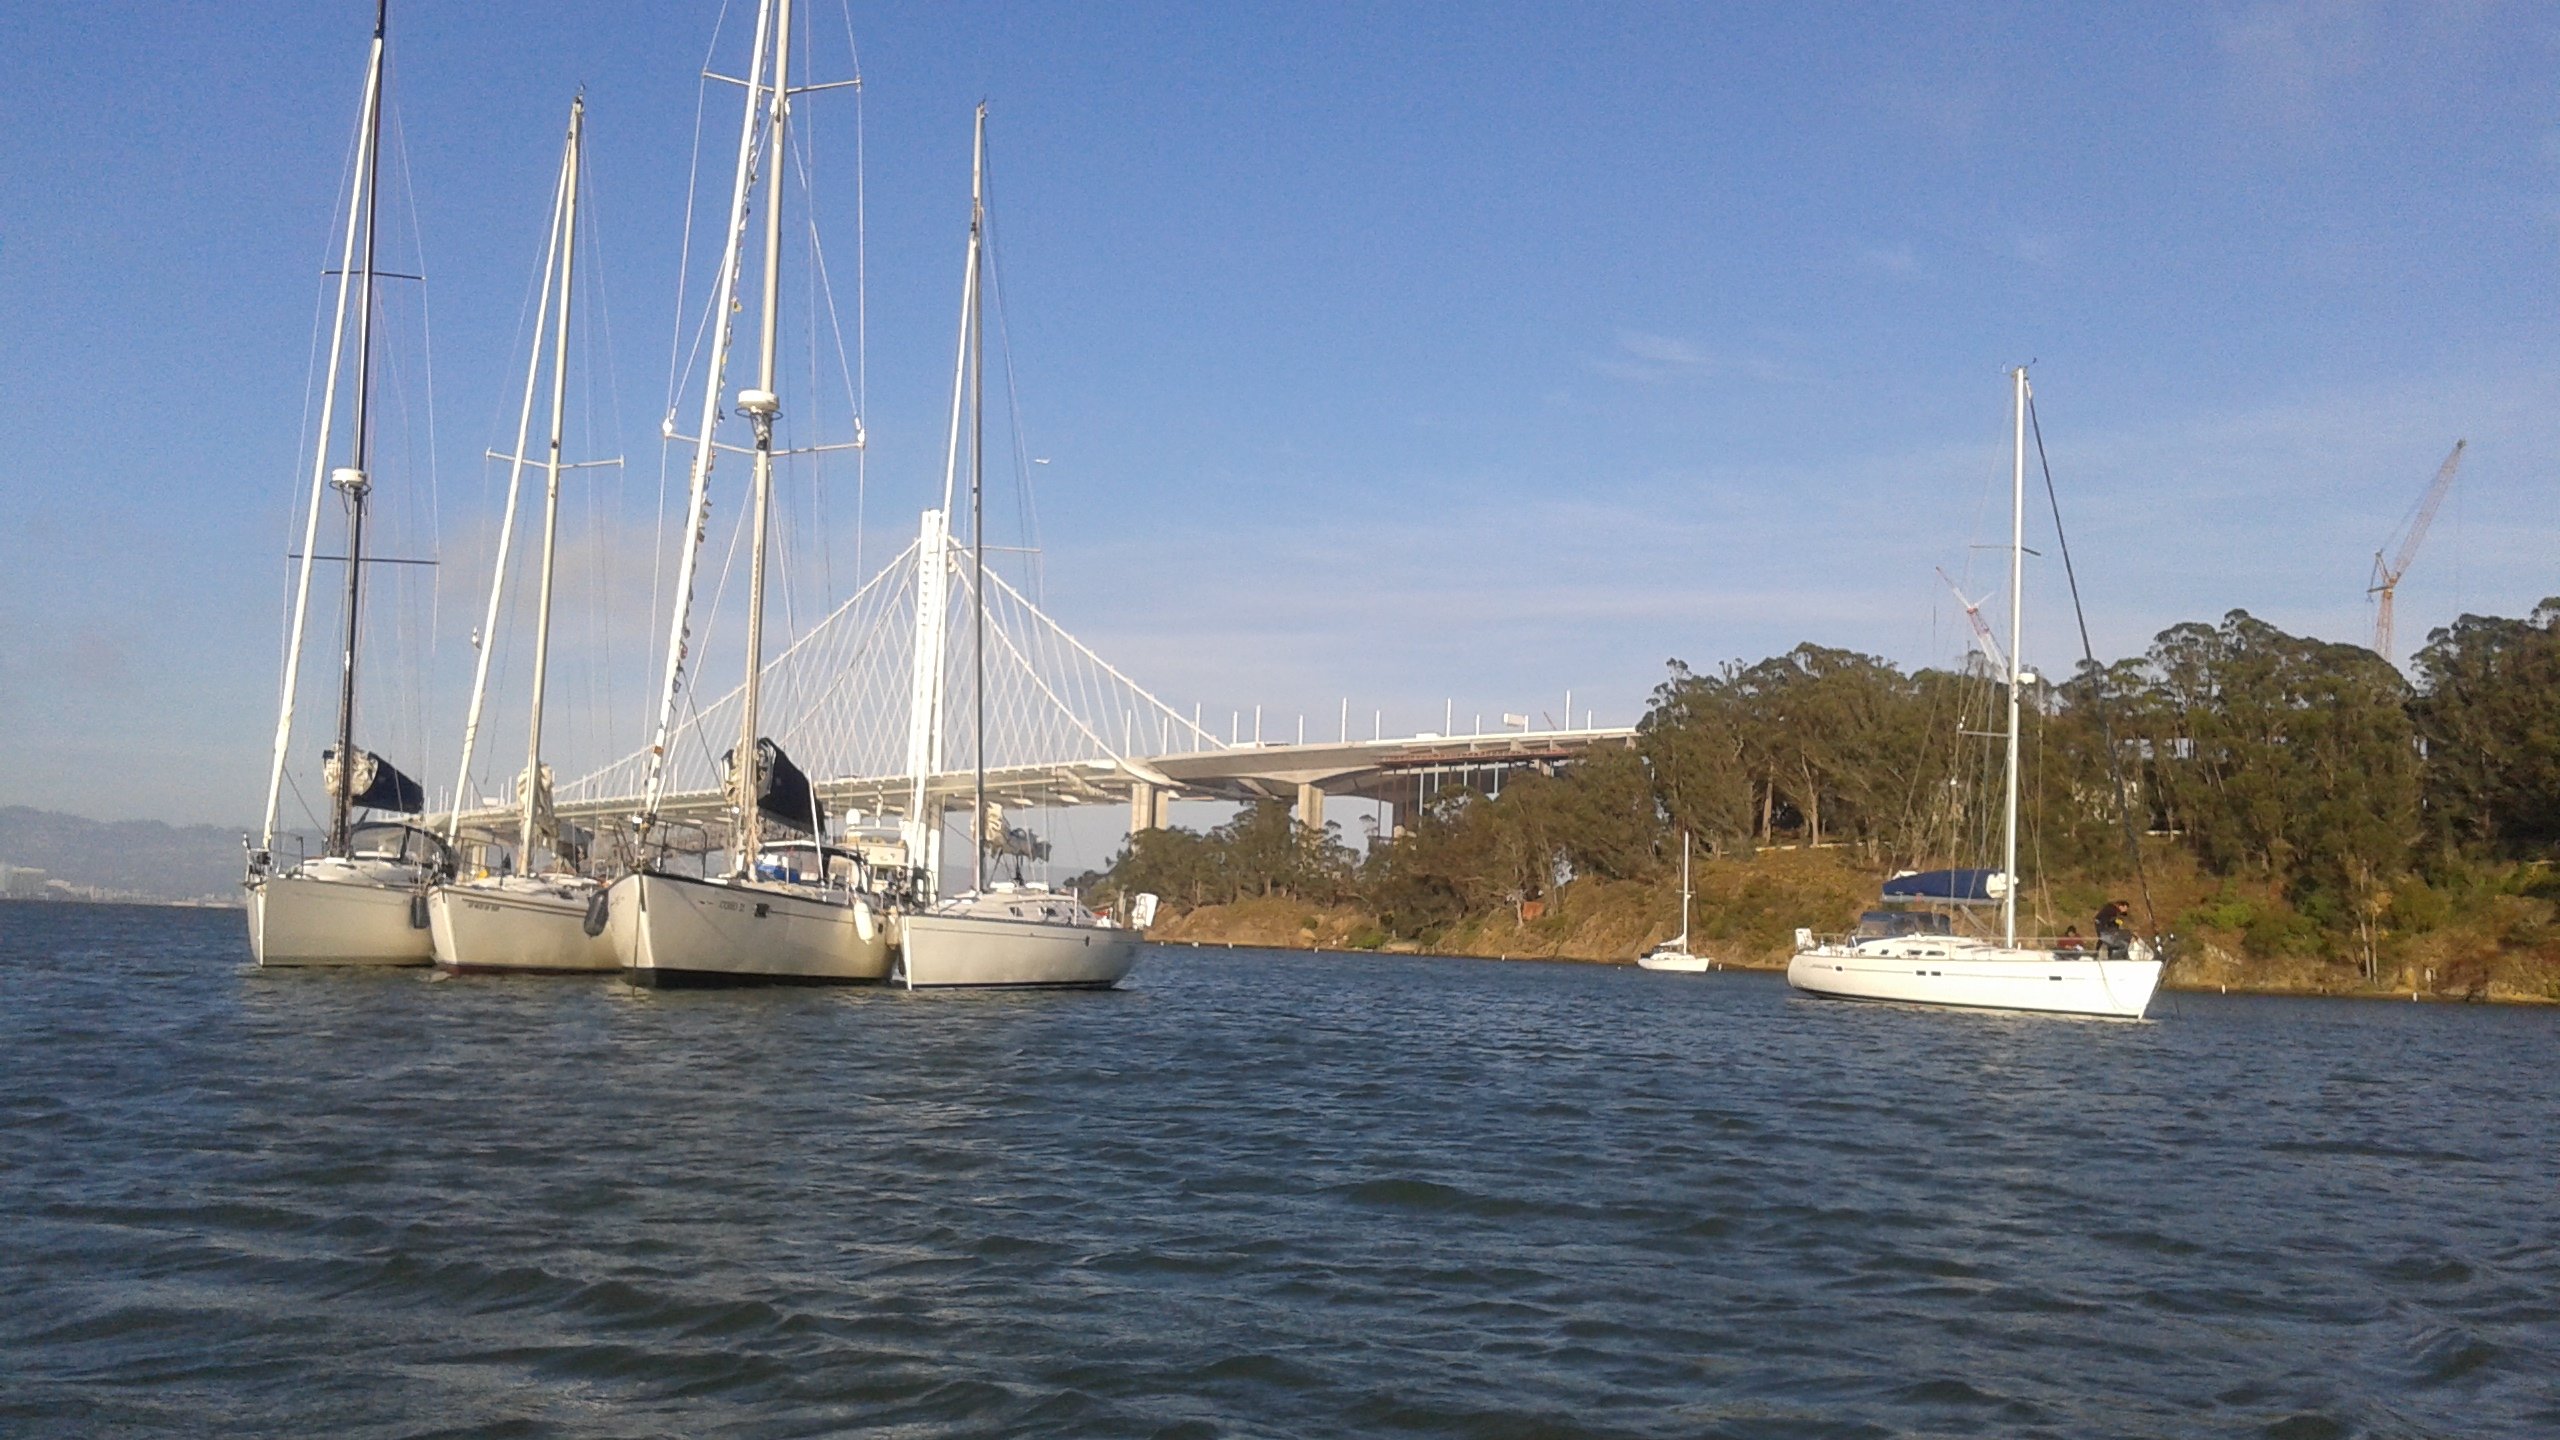 Yacht Tubbing, Good Company, and Clipper Cove - Modern Sailing School's Sailstice "Sail-bration"! 